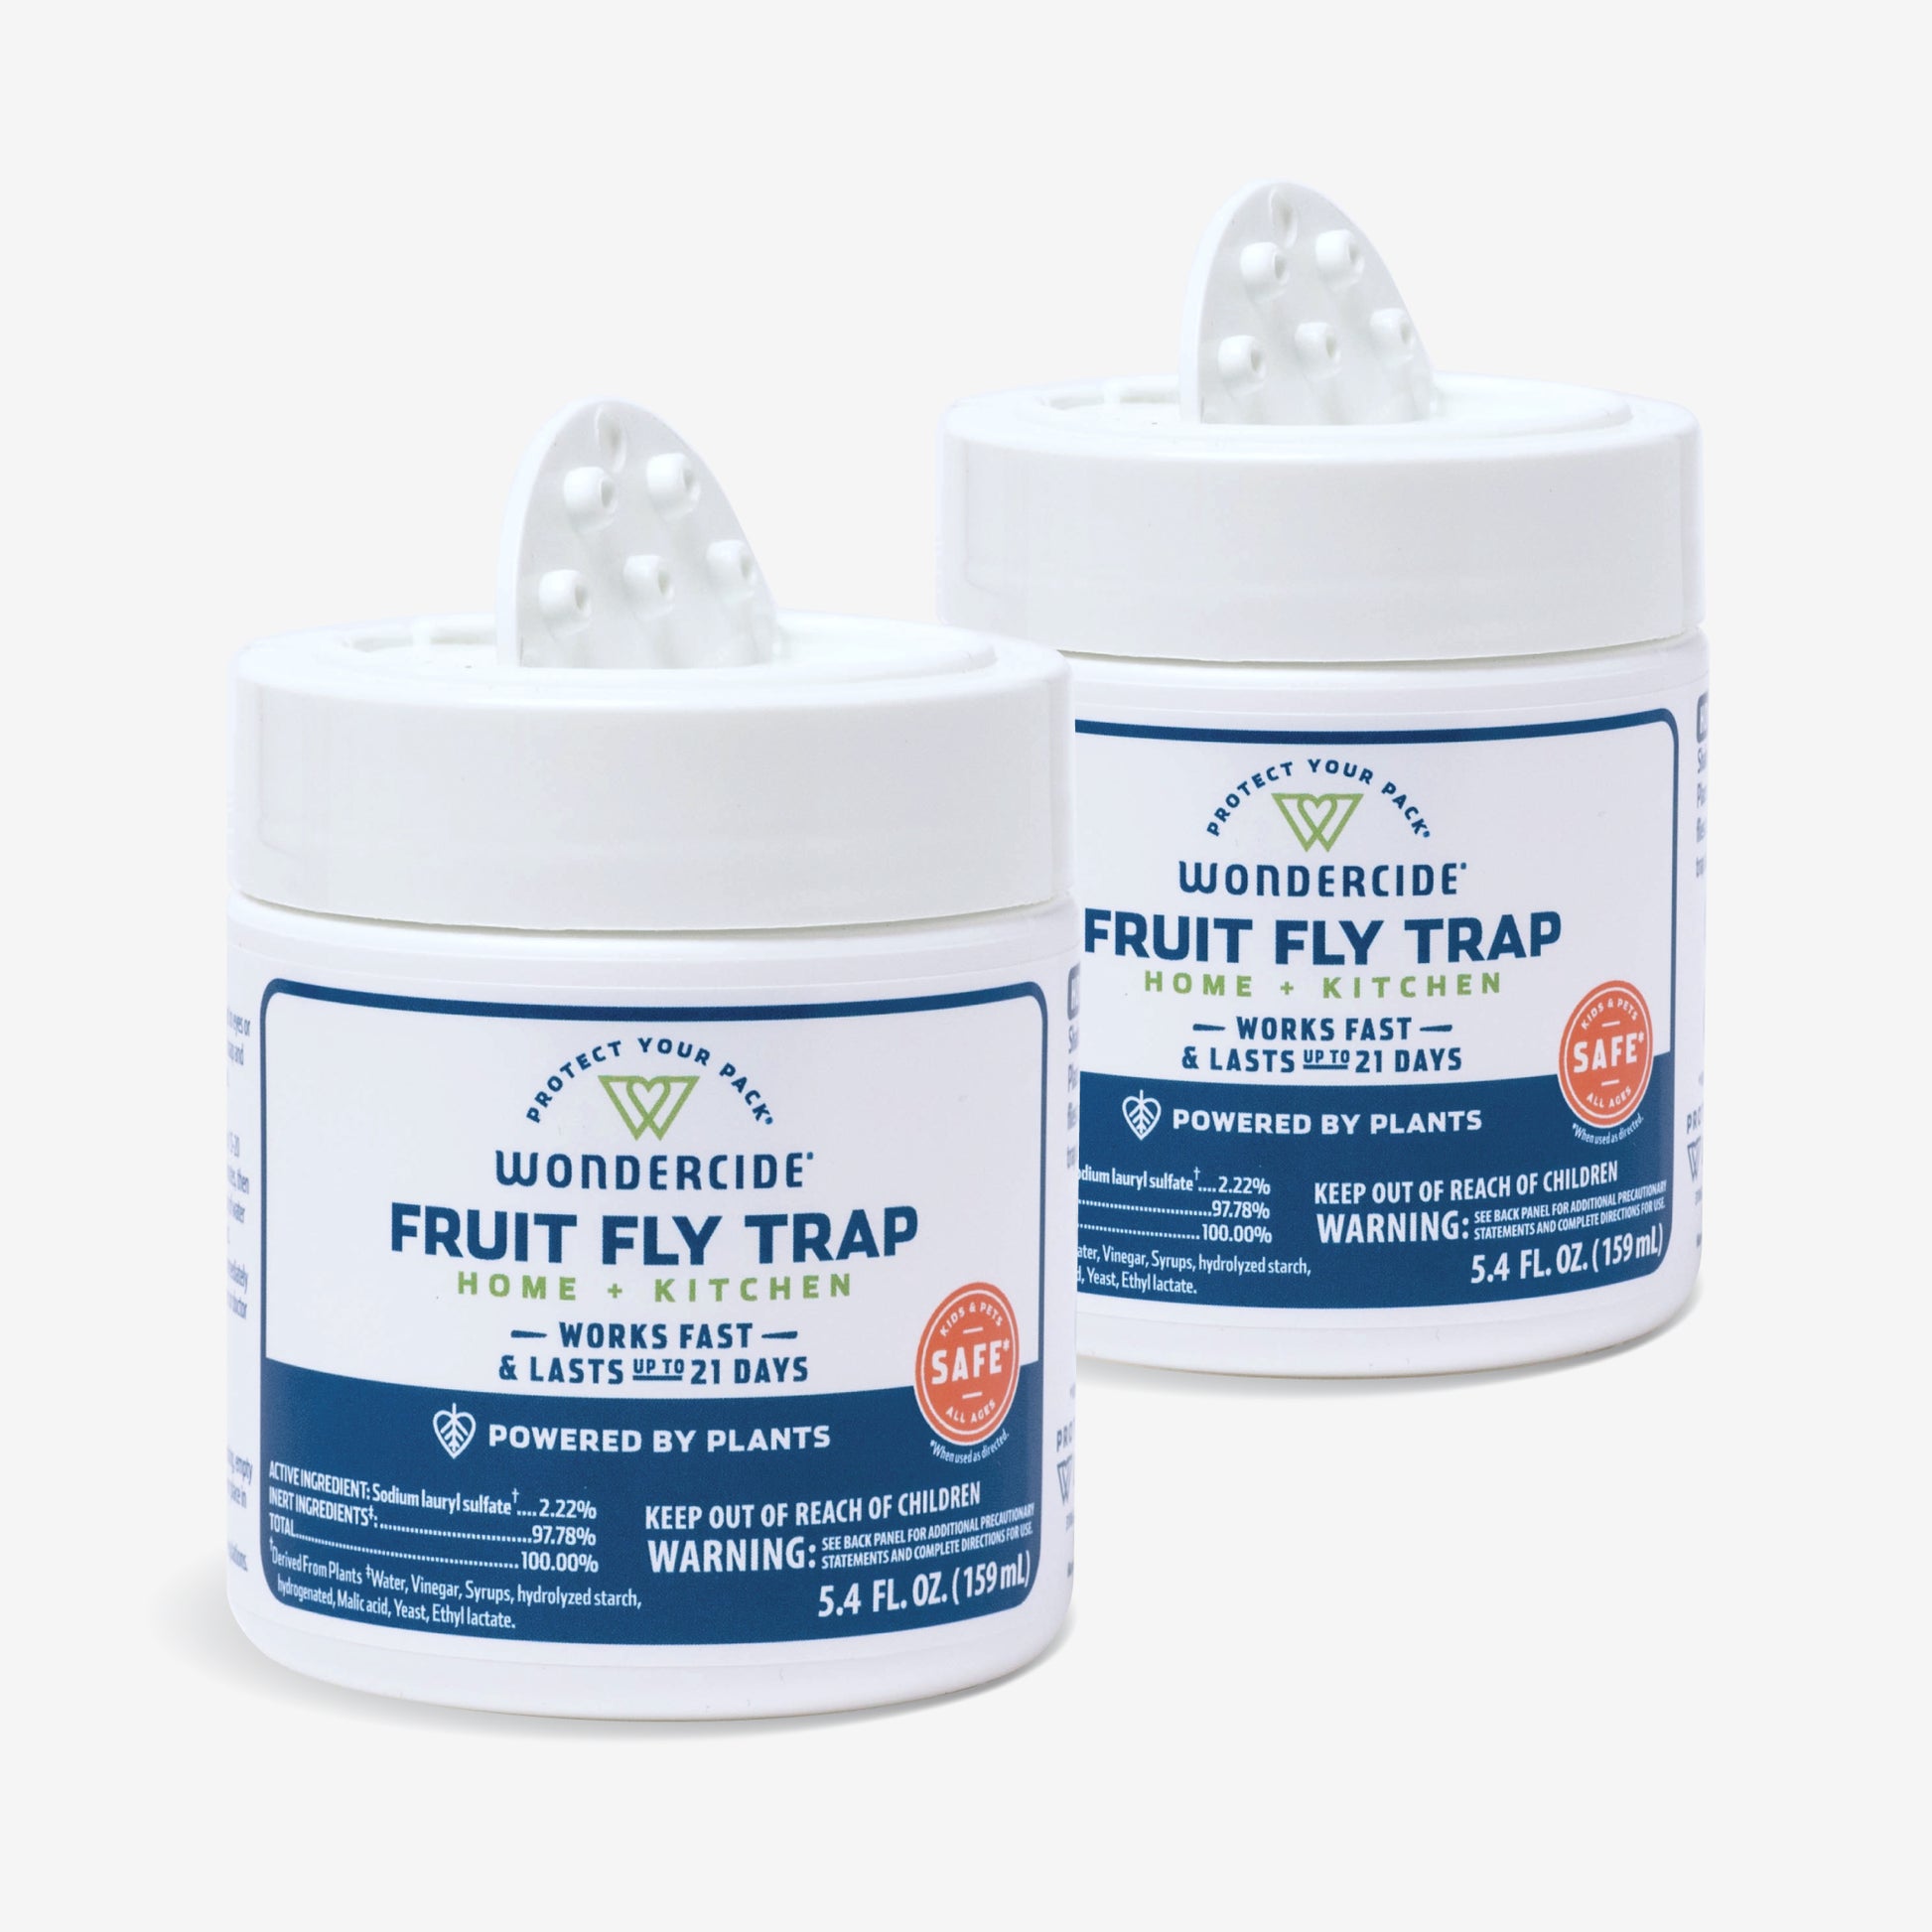  Wondercide - Fruit Fly Trap for Kitchen, Home, and Indoor  Areas - Fruit Fly Killer - Pet and People Safe - Made in USA & Plant Based  - 5.4 oz - 2 Pack : Patio, Lawn & Garden